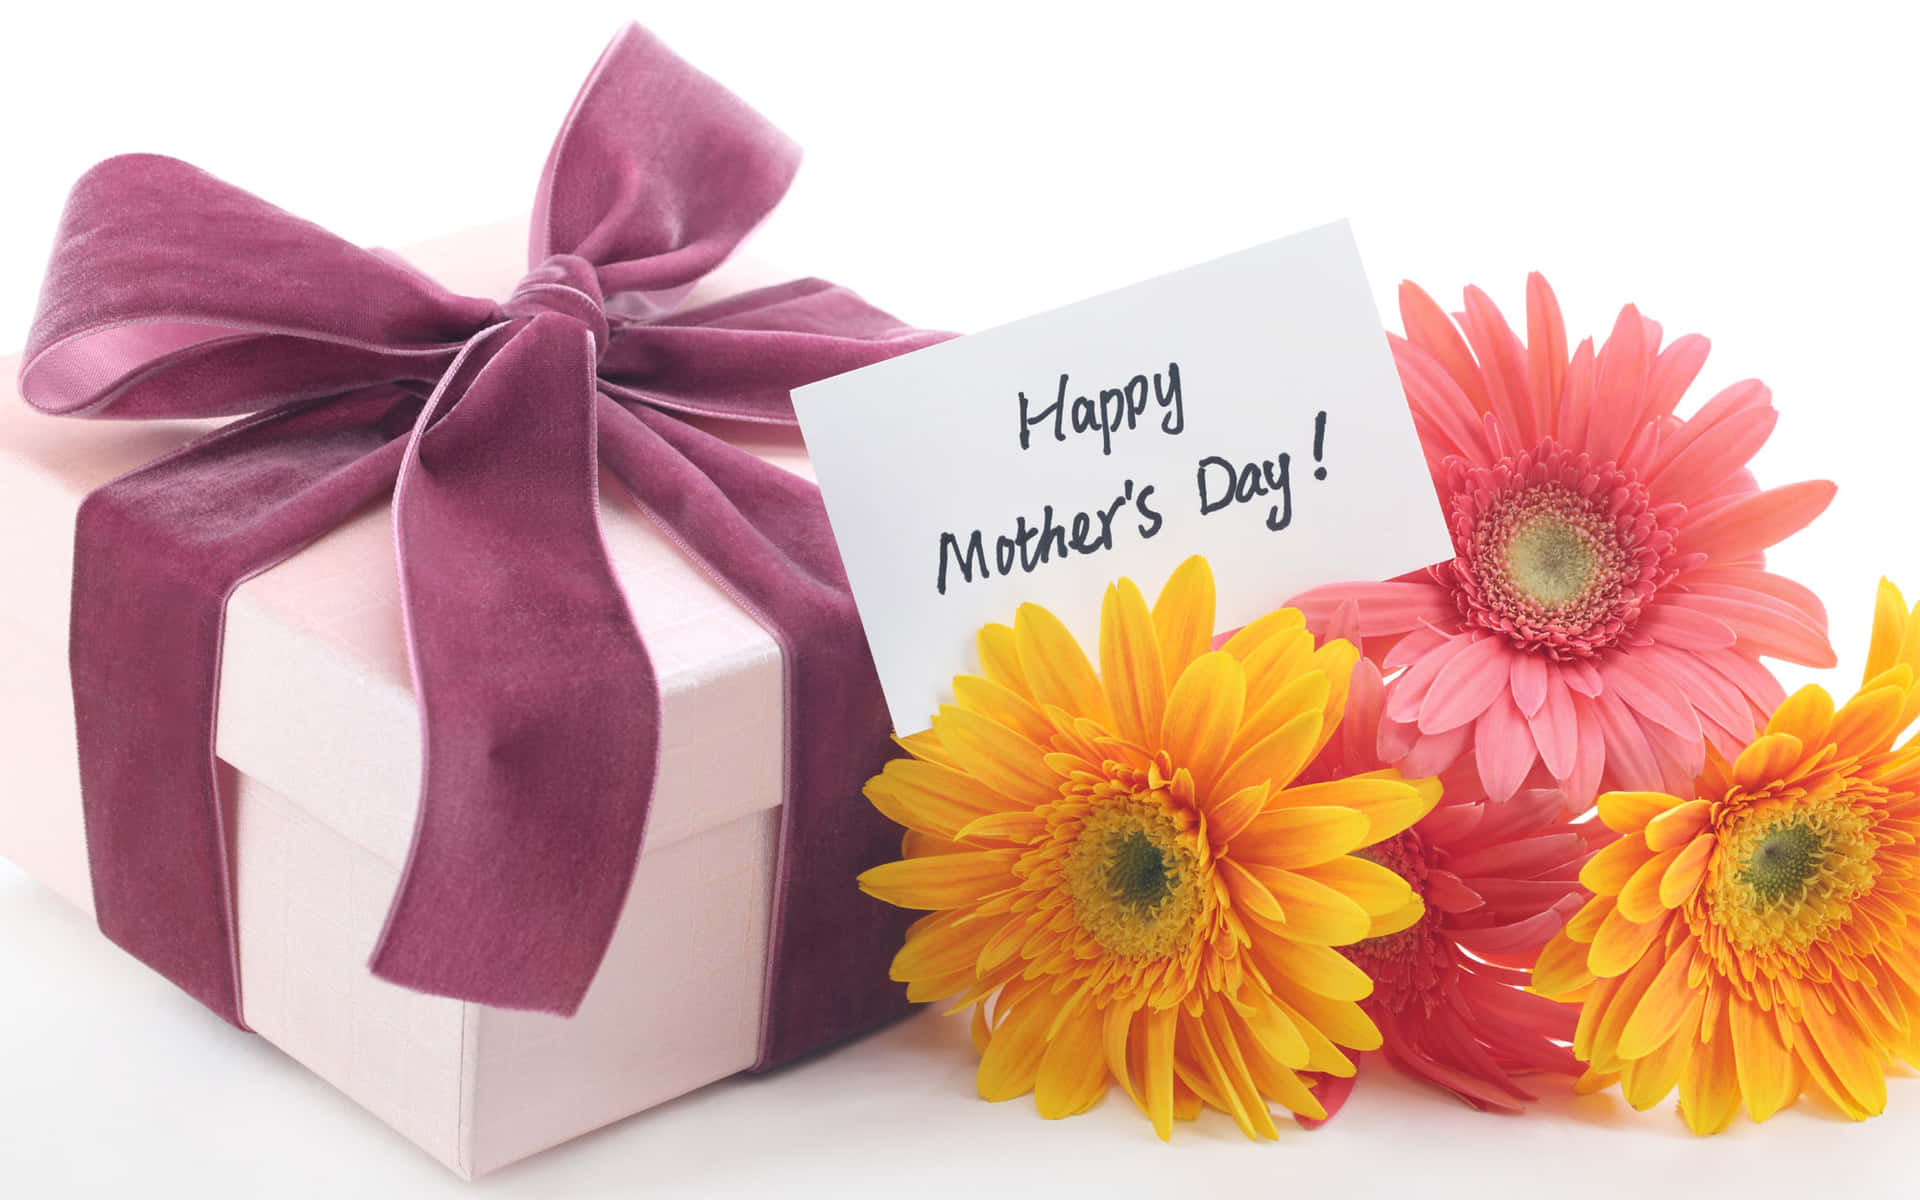 Happy Mothers Day Card Flowers Gift Box Hd